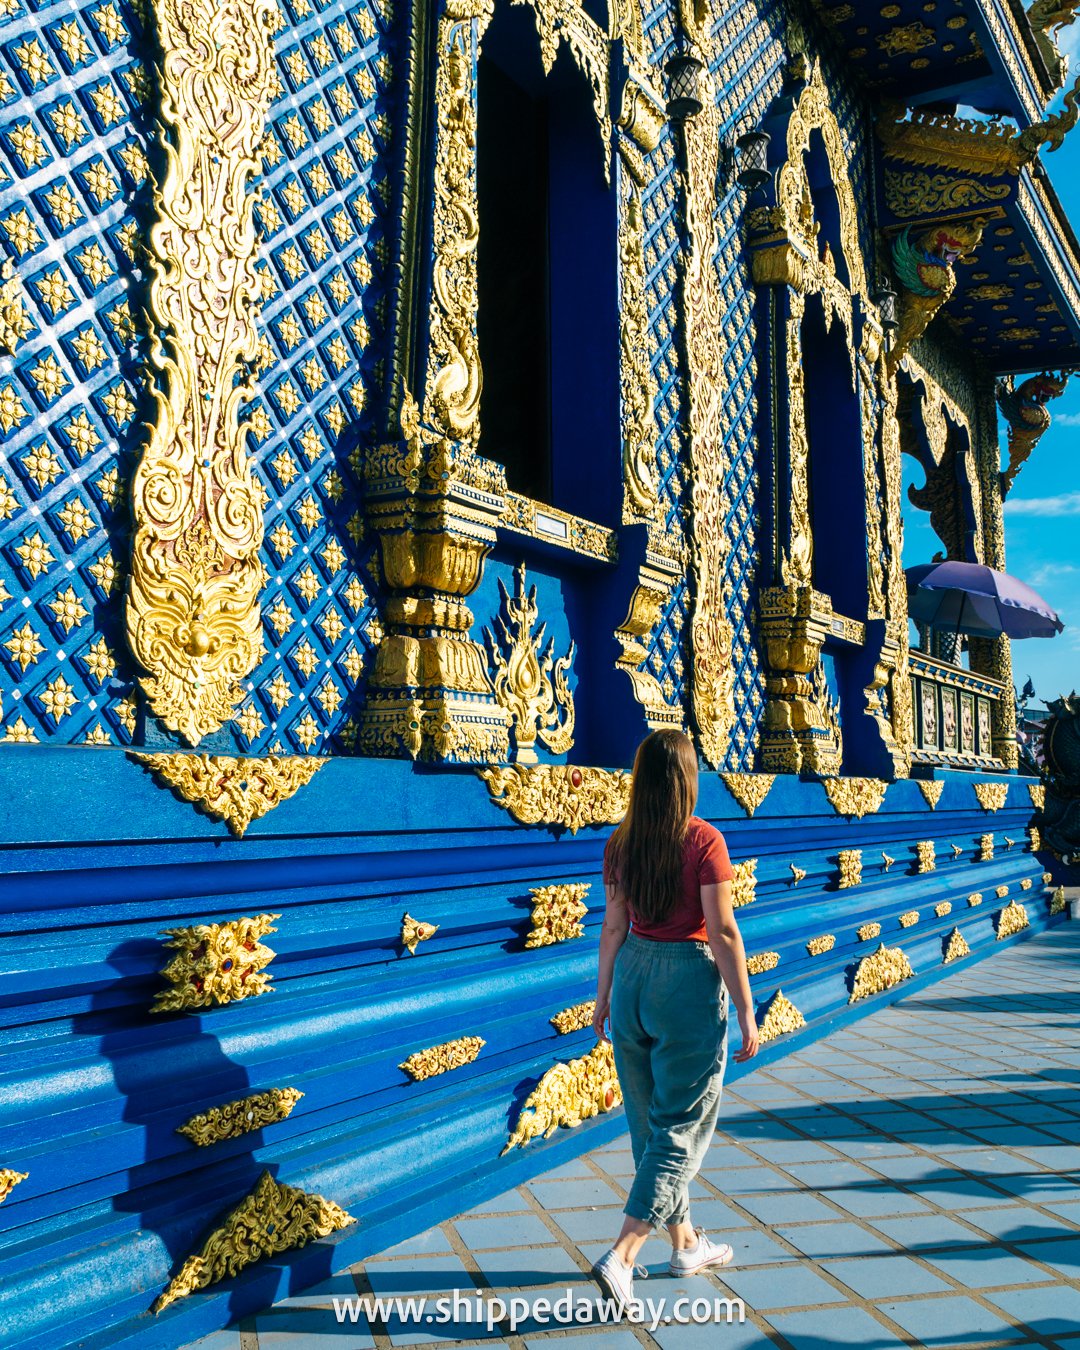 things to see at chiang rai, how to get to chiang rai blue temple, best time to visit blue temple chiang rai